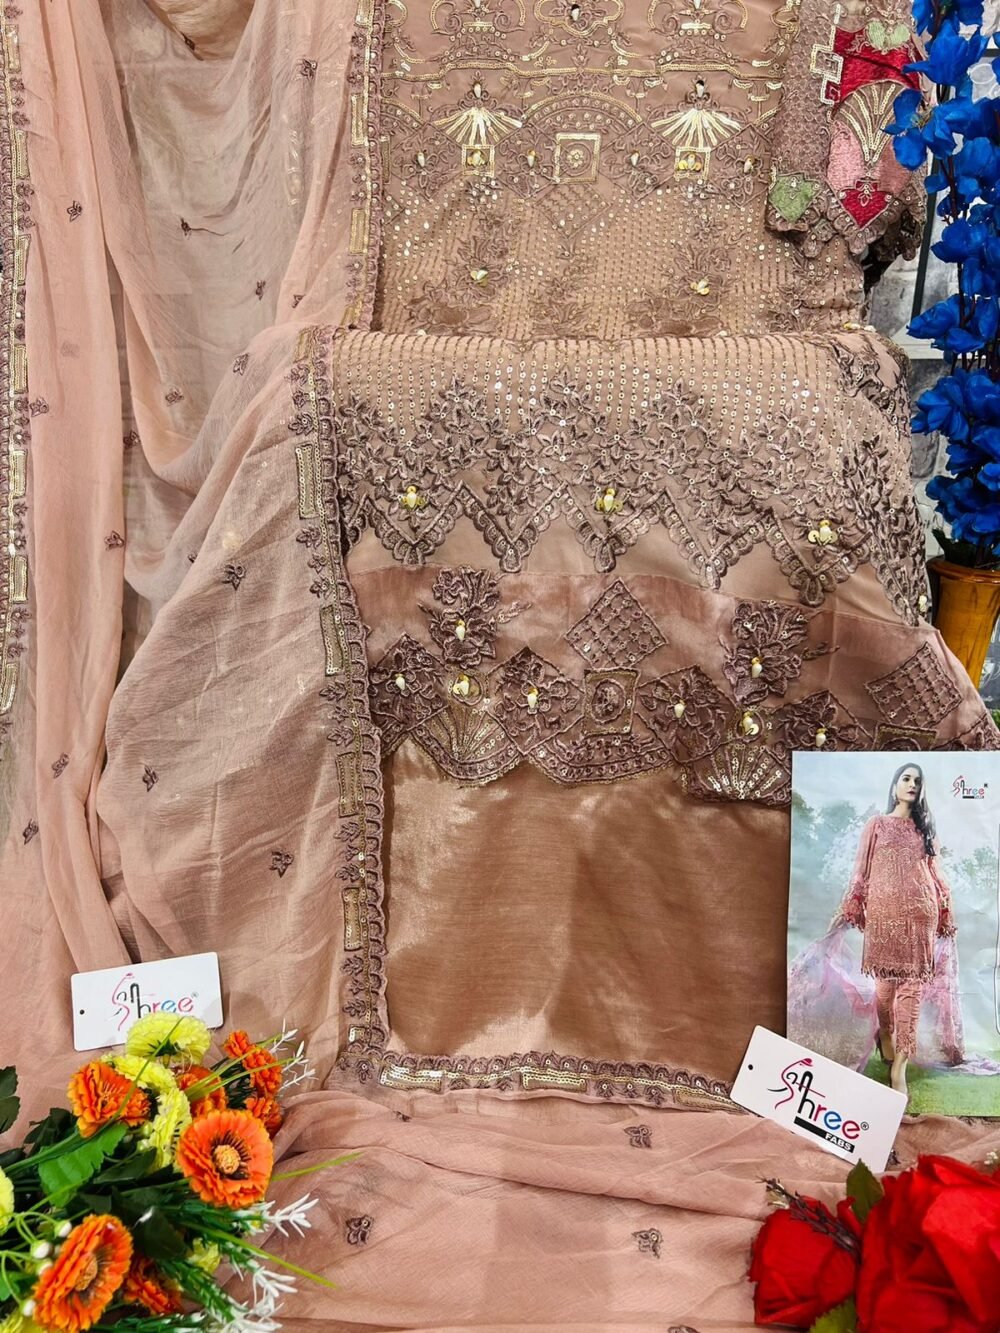 Shree fab©️present ❤️ code k. 1666 semi stitched🩷 Fox blooming very heavy embroidered very beautiful Rust colour semi stitched outfit with heavy handwork ❤️ unstitched santoon inner and bottoms Najmeen embrdroidered border dupatta 😍 ready stock 1220/-